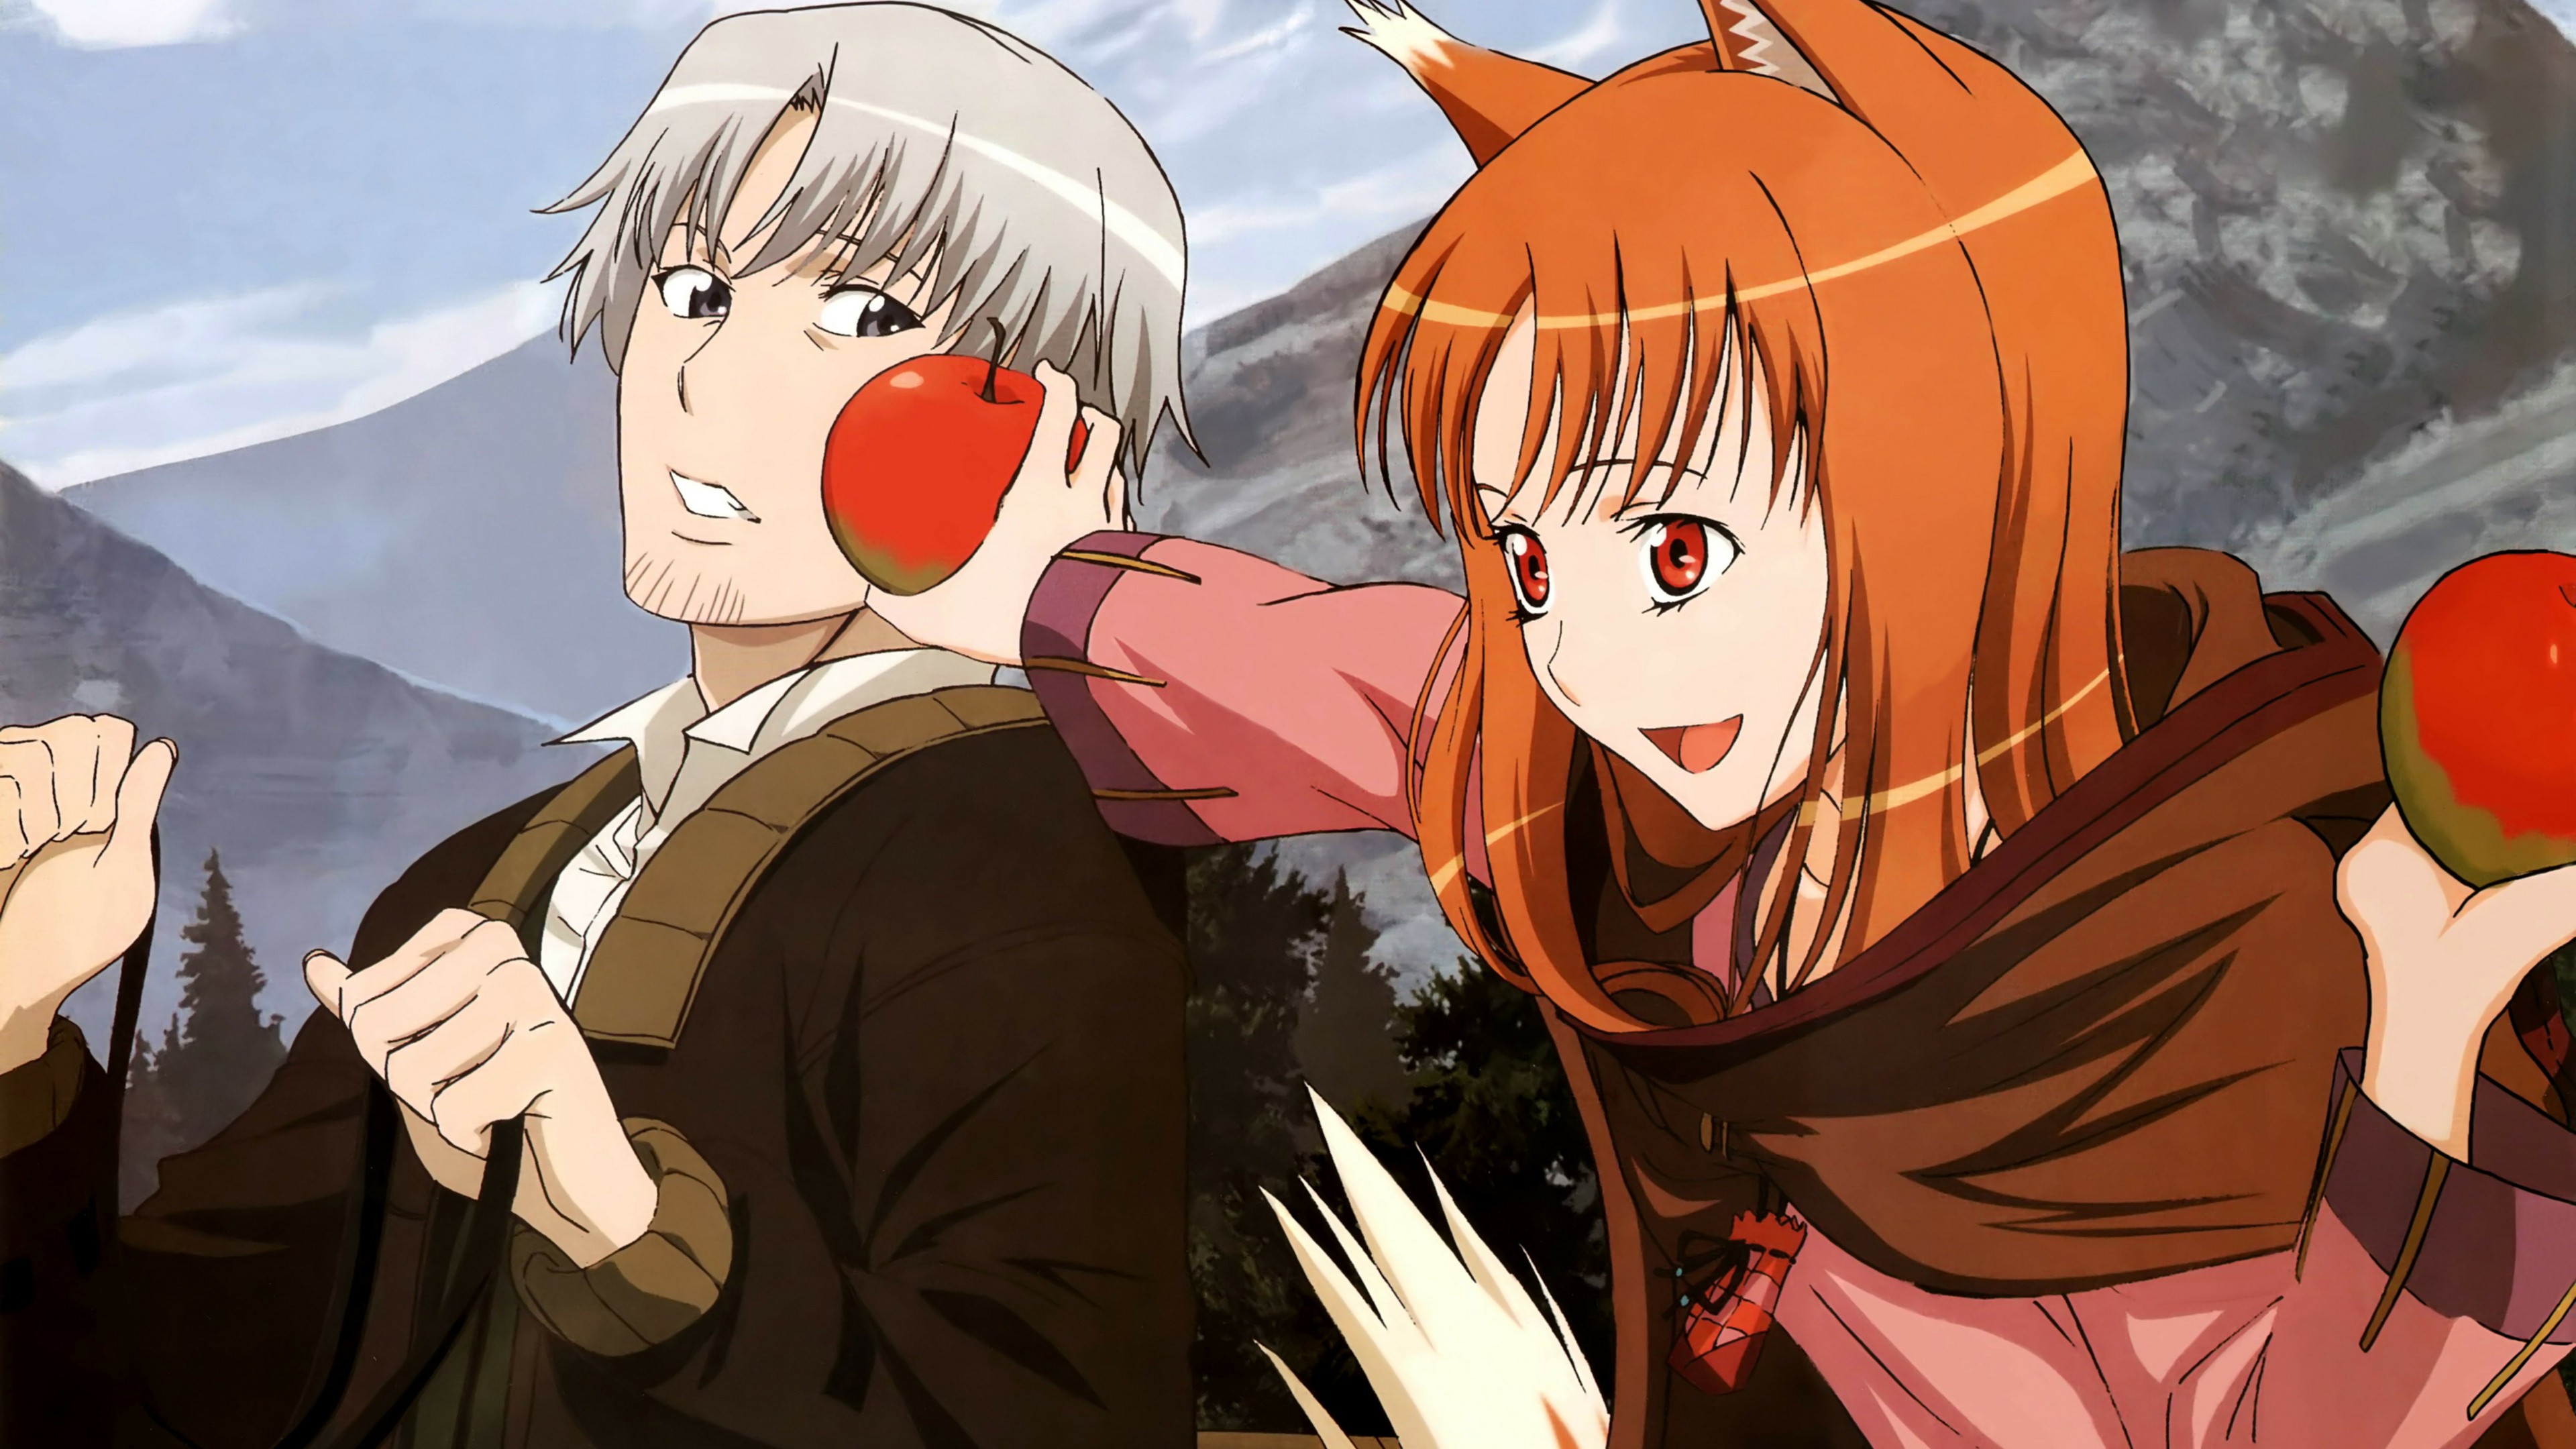 Anime Spice And Wolf Holo Lawrence Craft Apples 3840x2160